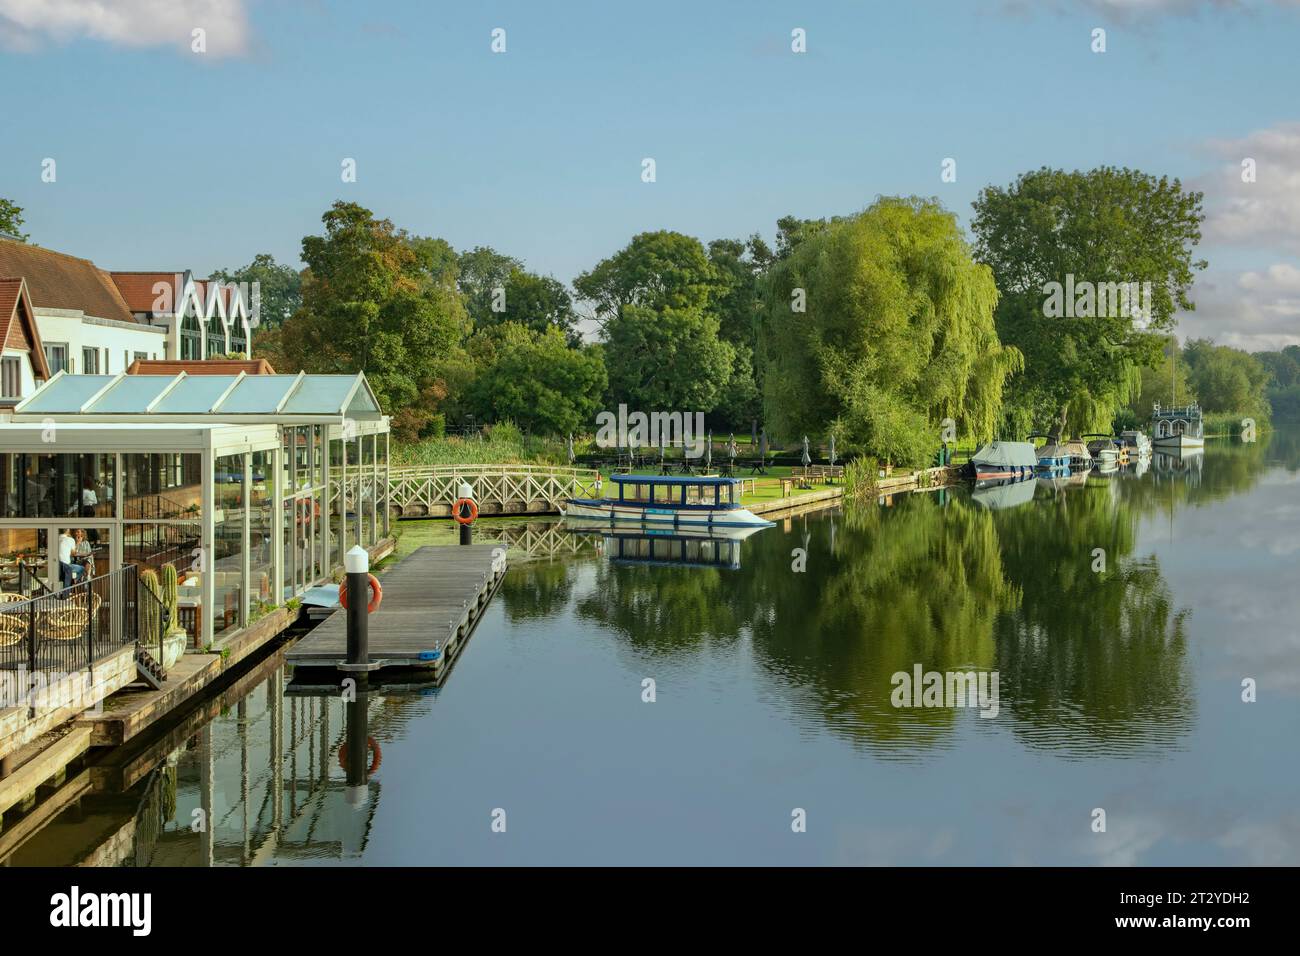 The Star and River Thames, Streatley, West Berkshire, England Stock Photo